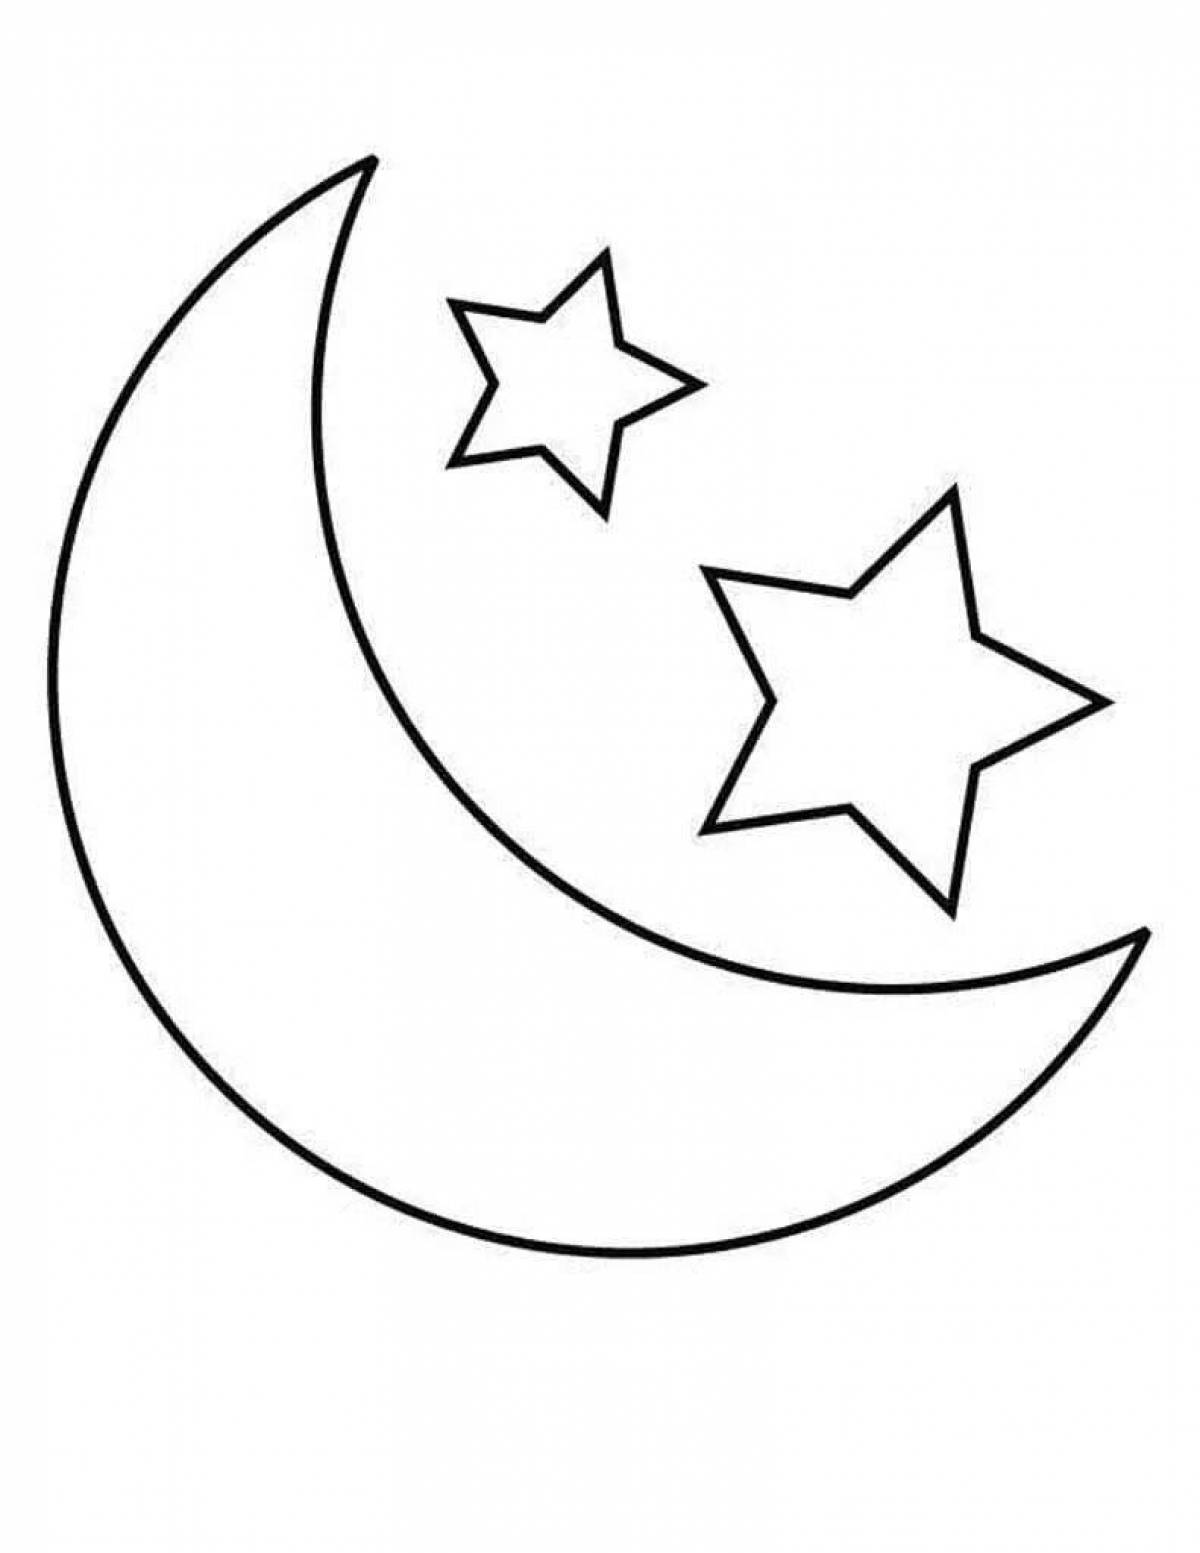 Glowing night sky coloring page